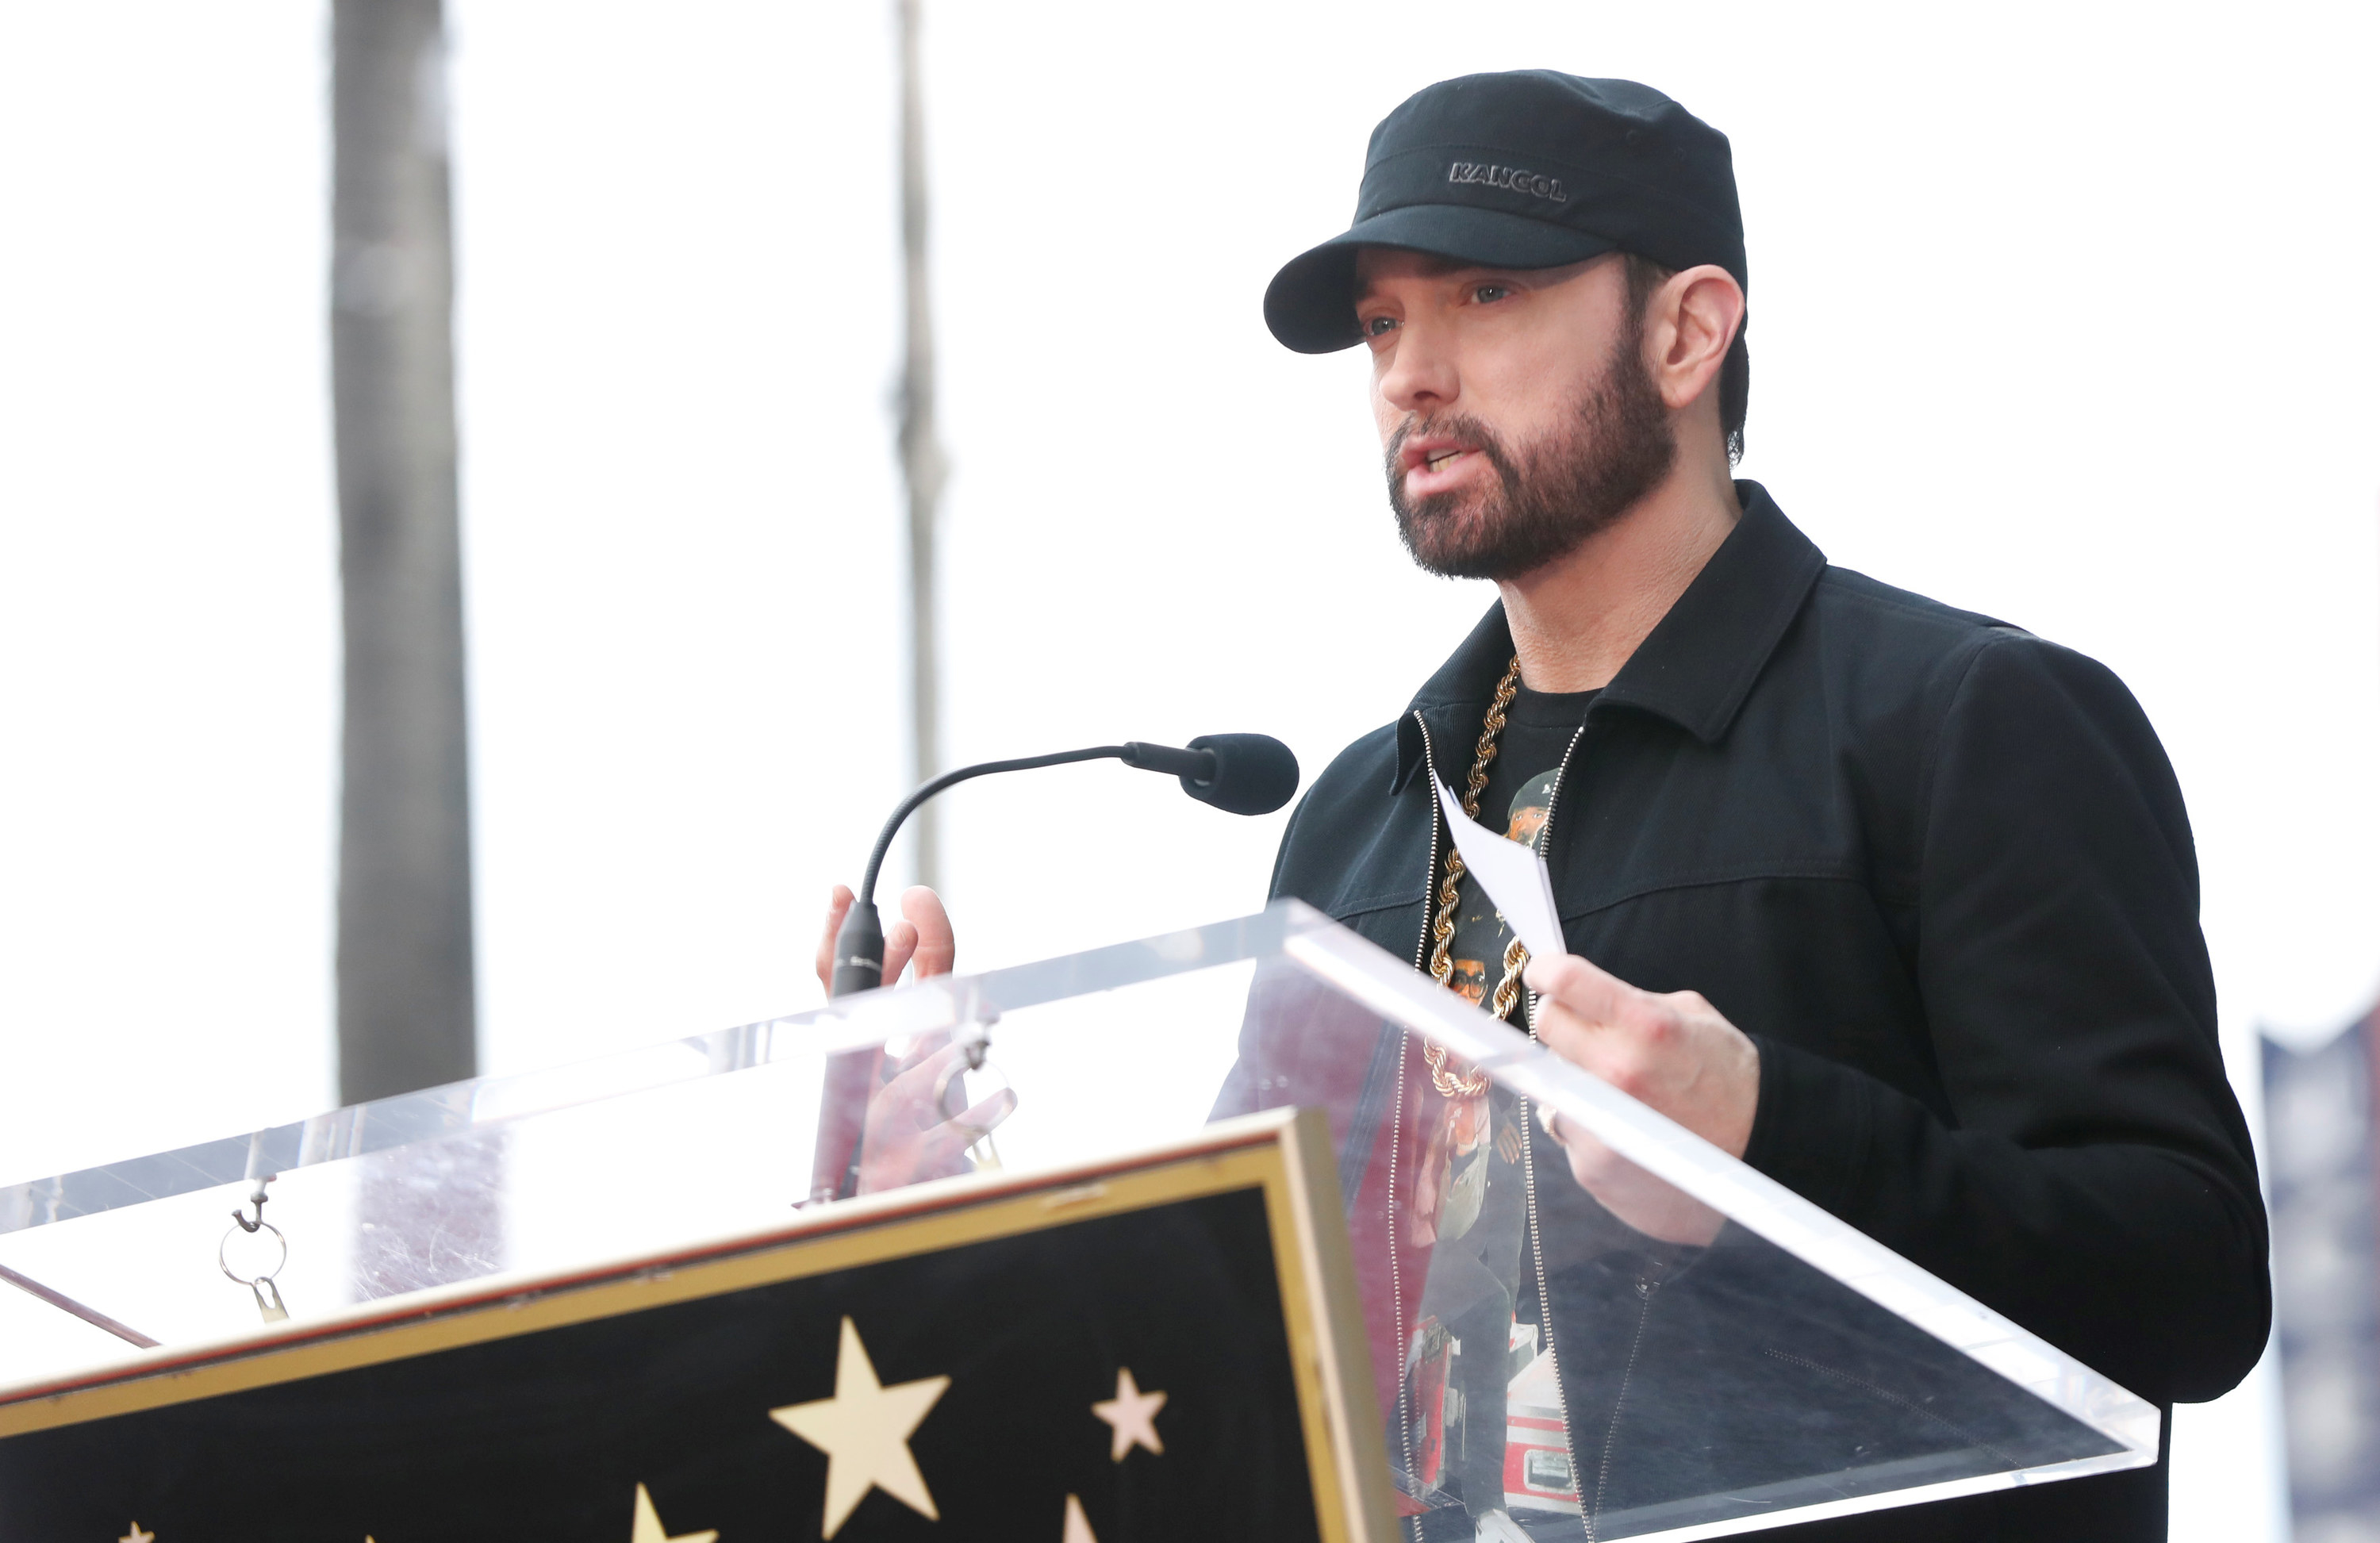 Eminem with a beard getting his Star on the Hollywood Walk of Fame in 2020